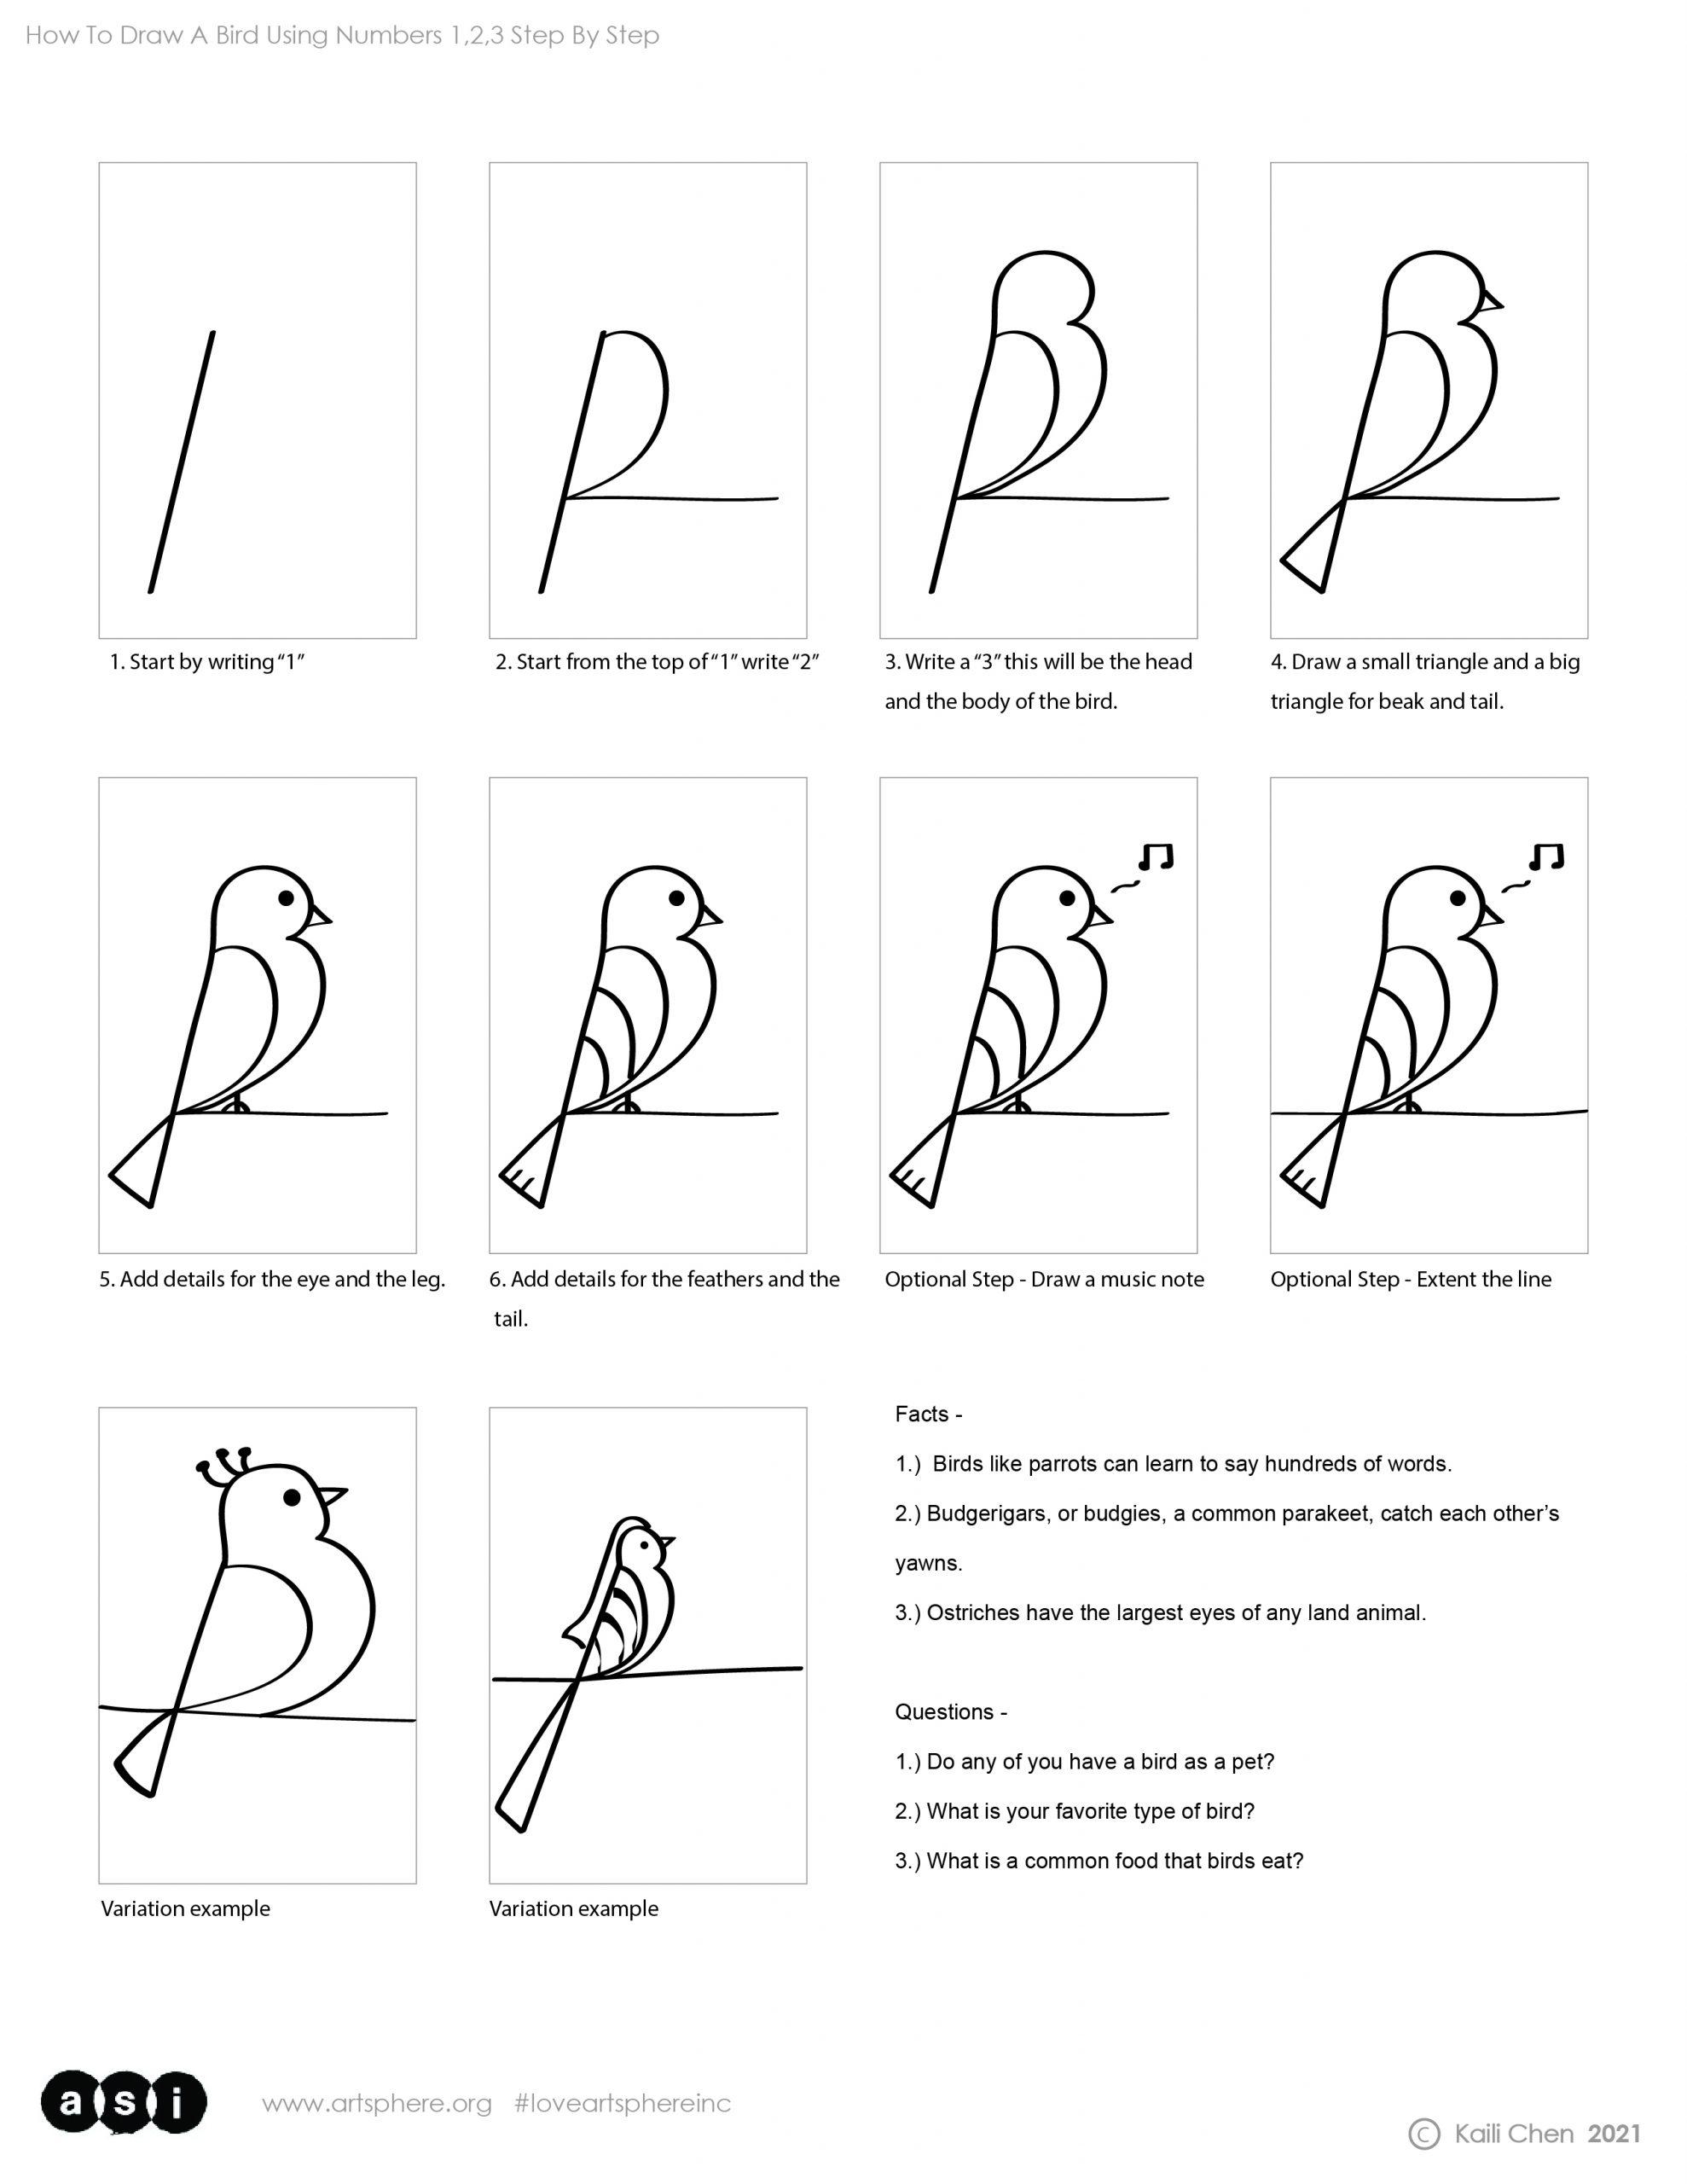 5 Ways How To Draw A Bird + Worksheet - Smiling Colors